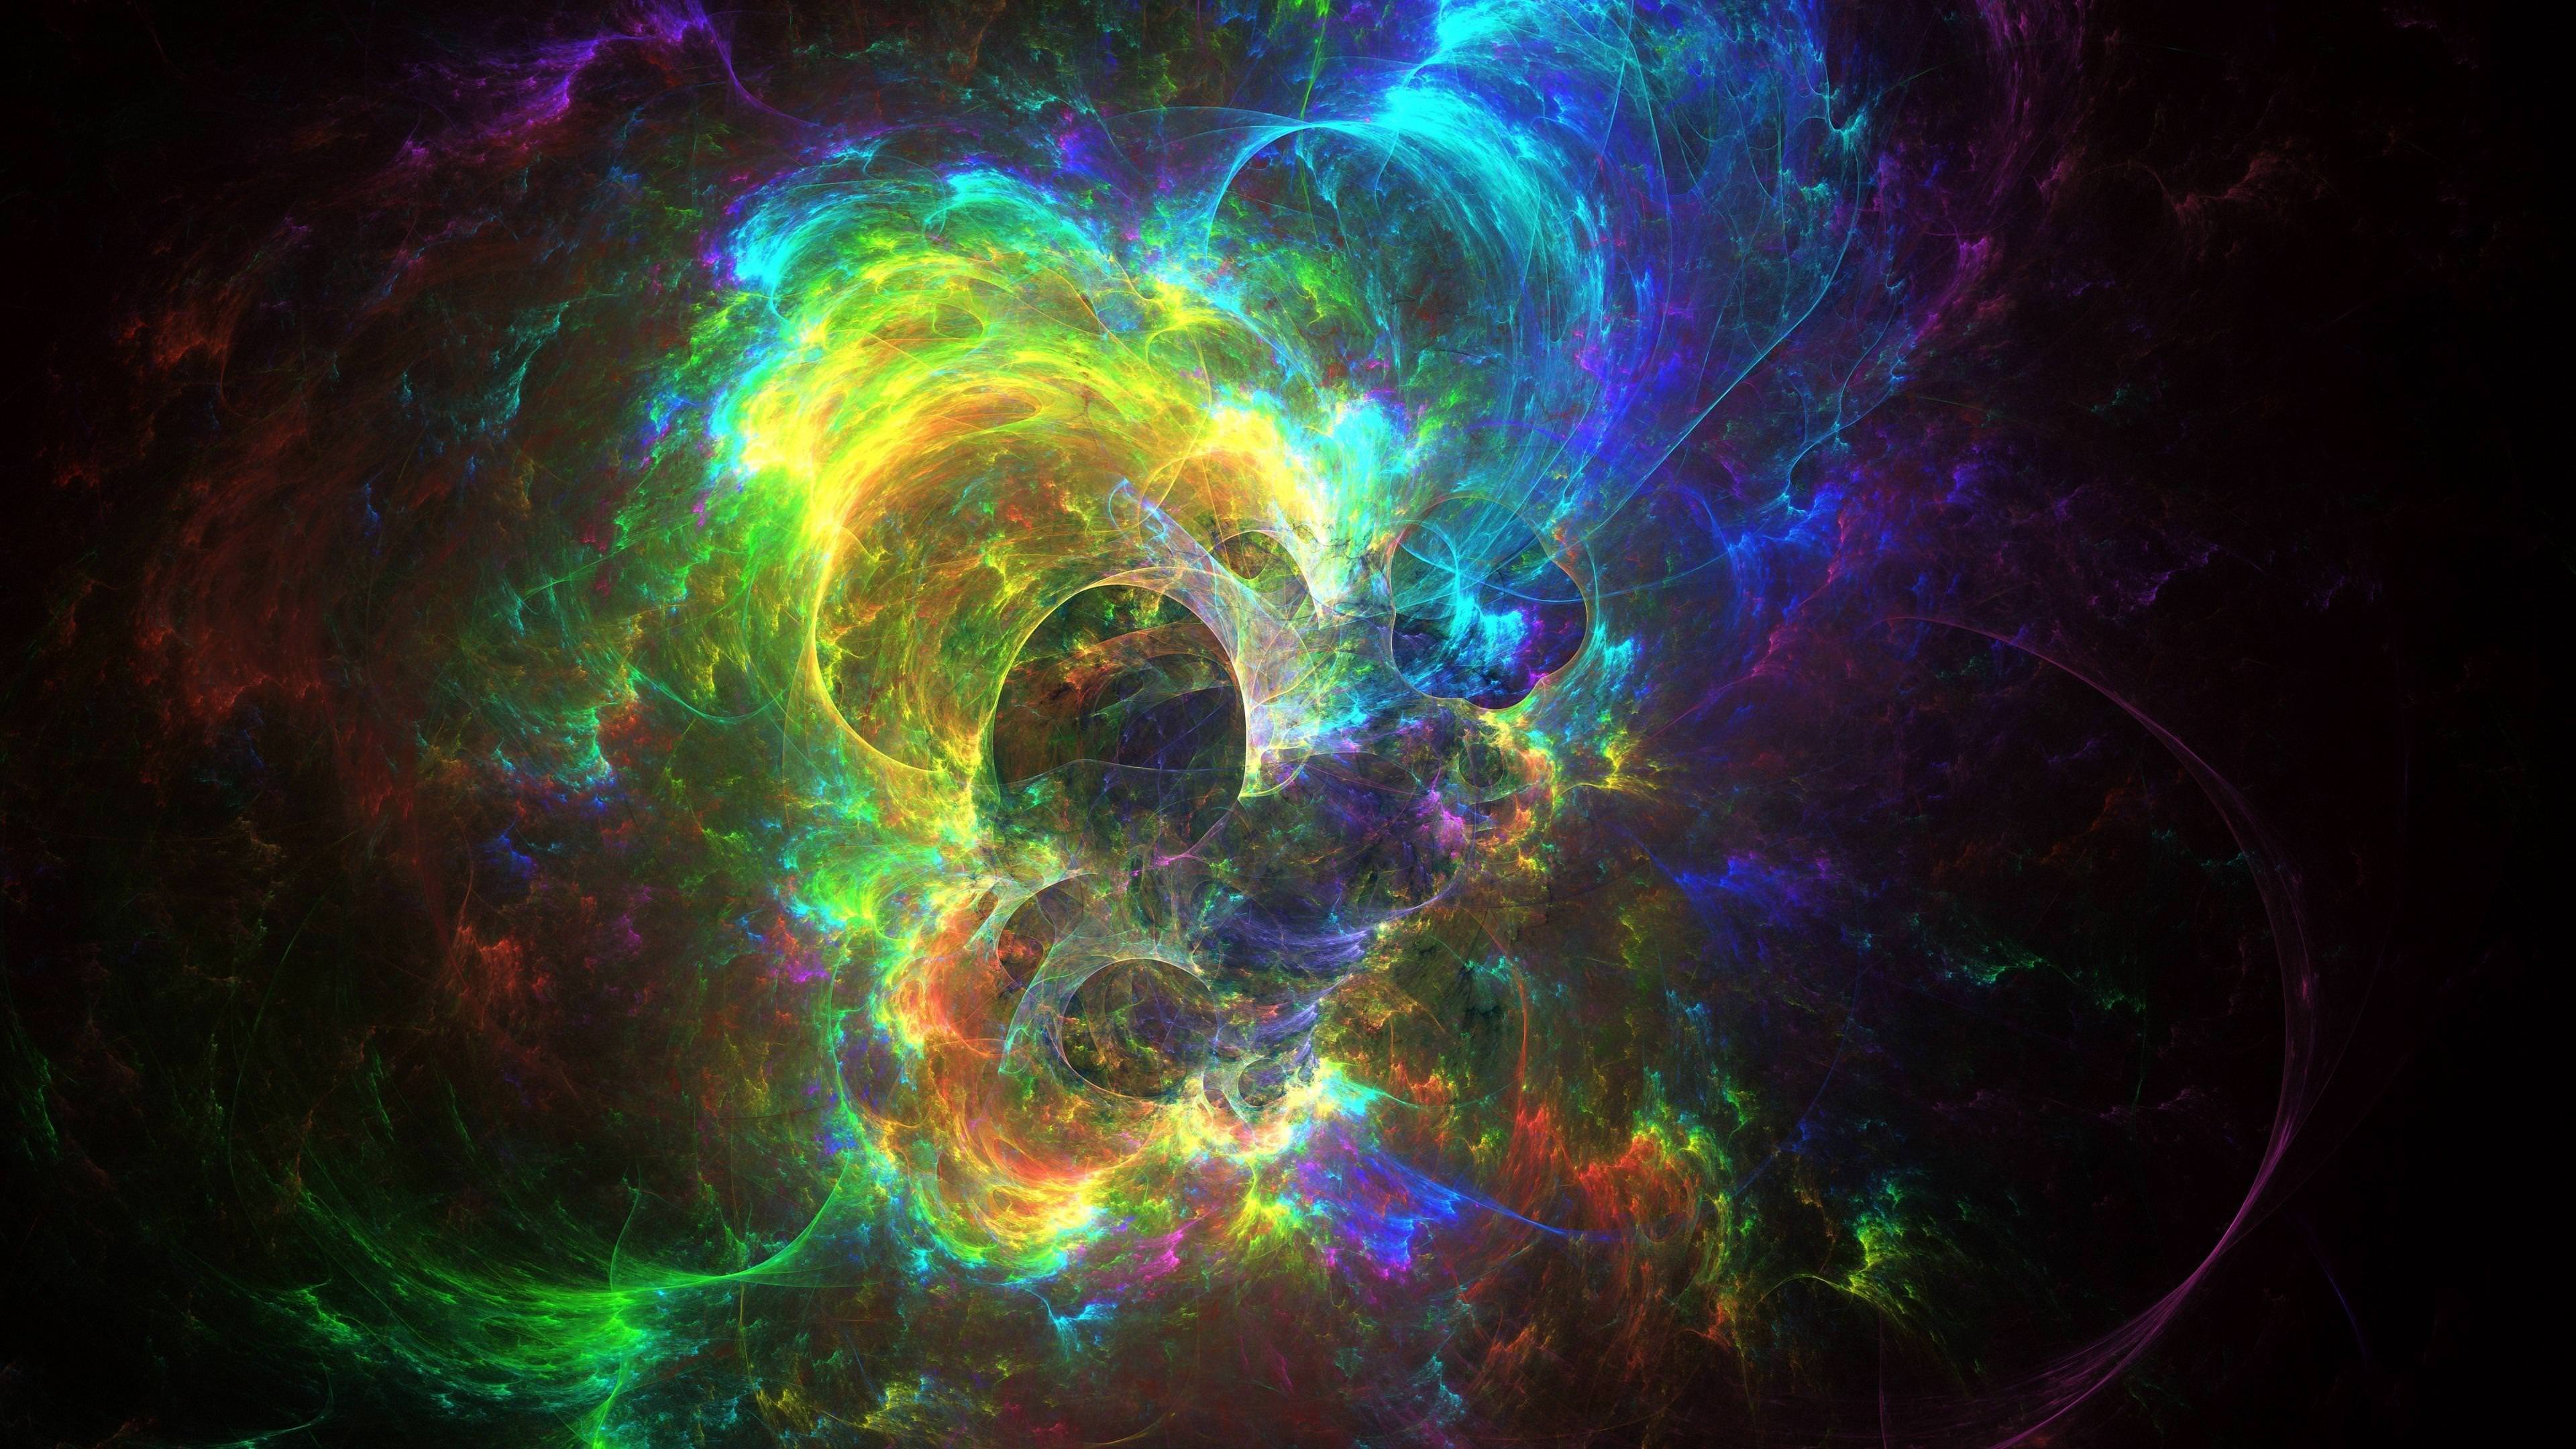 Cosmic 4K wallpaper for your desktop or mobile screen free and easy to download